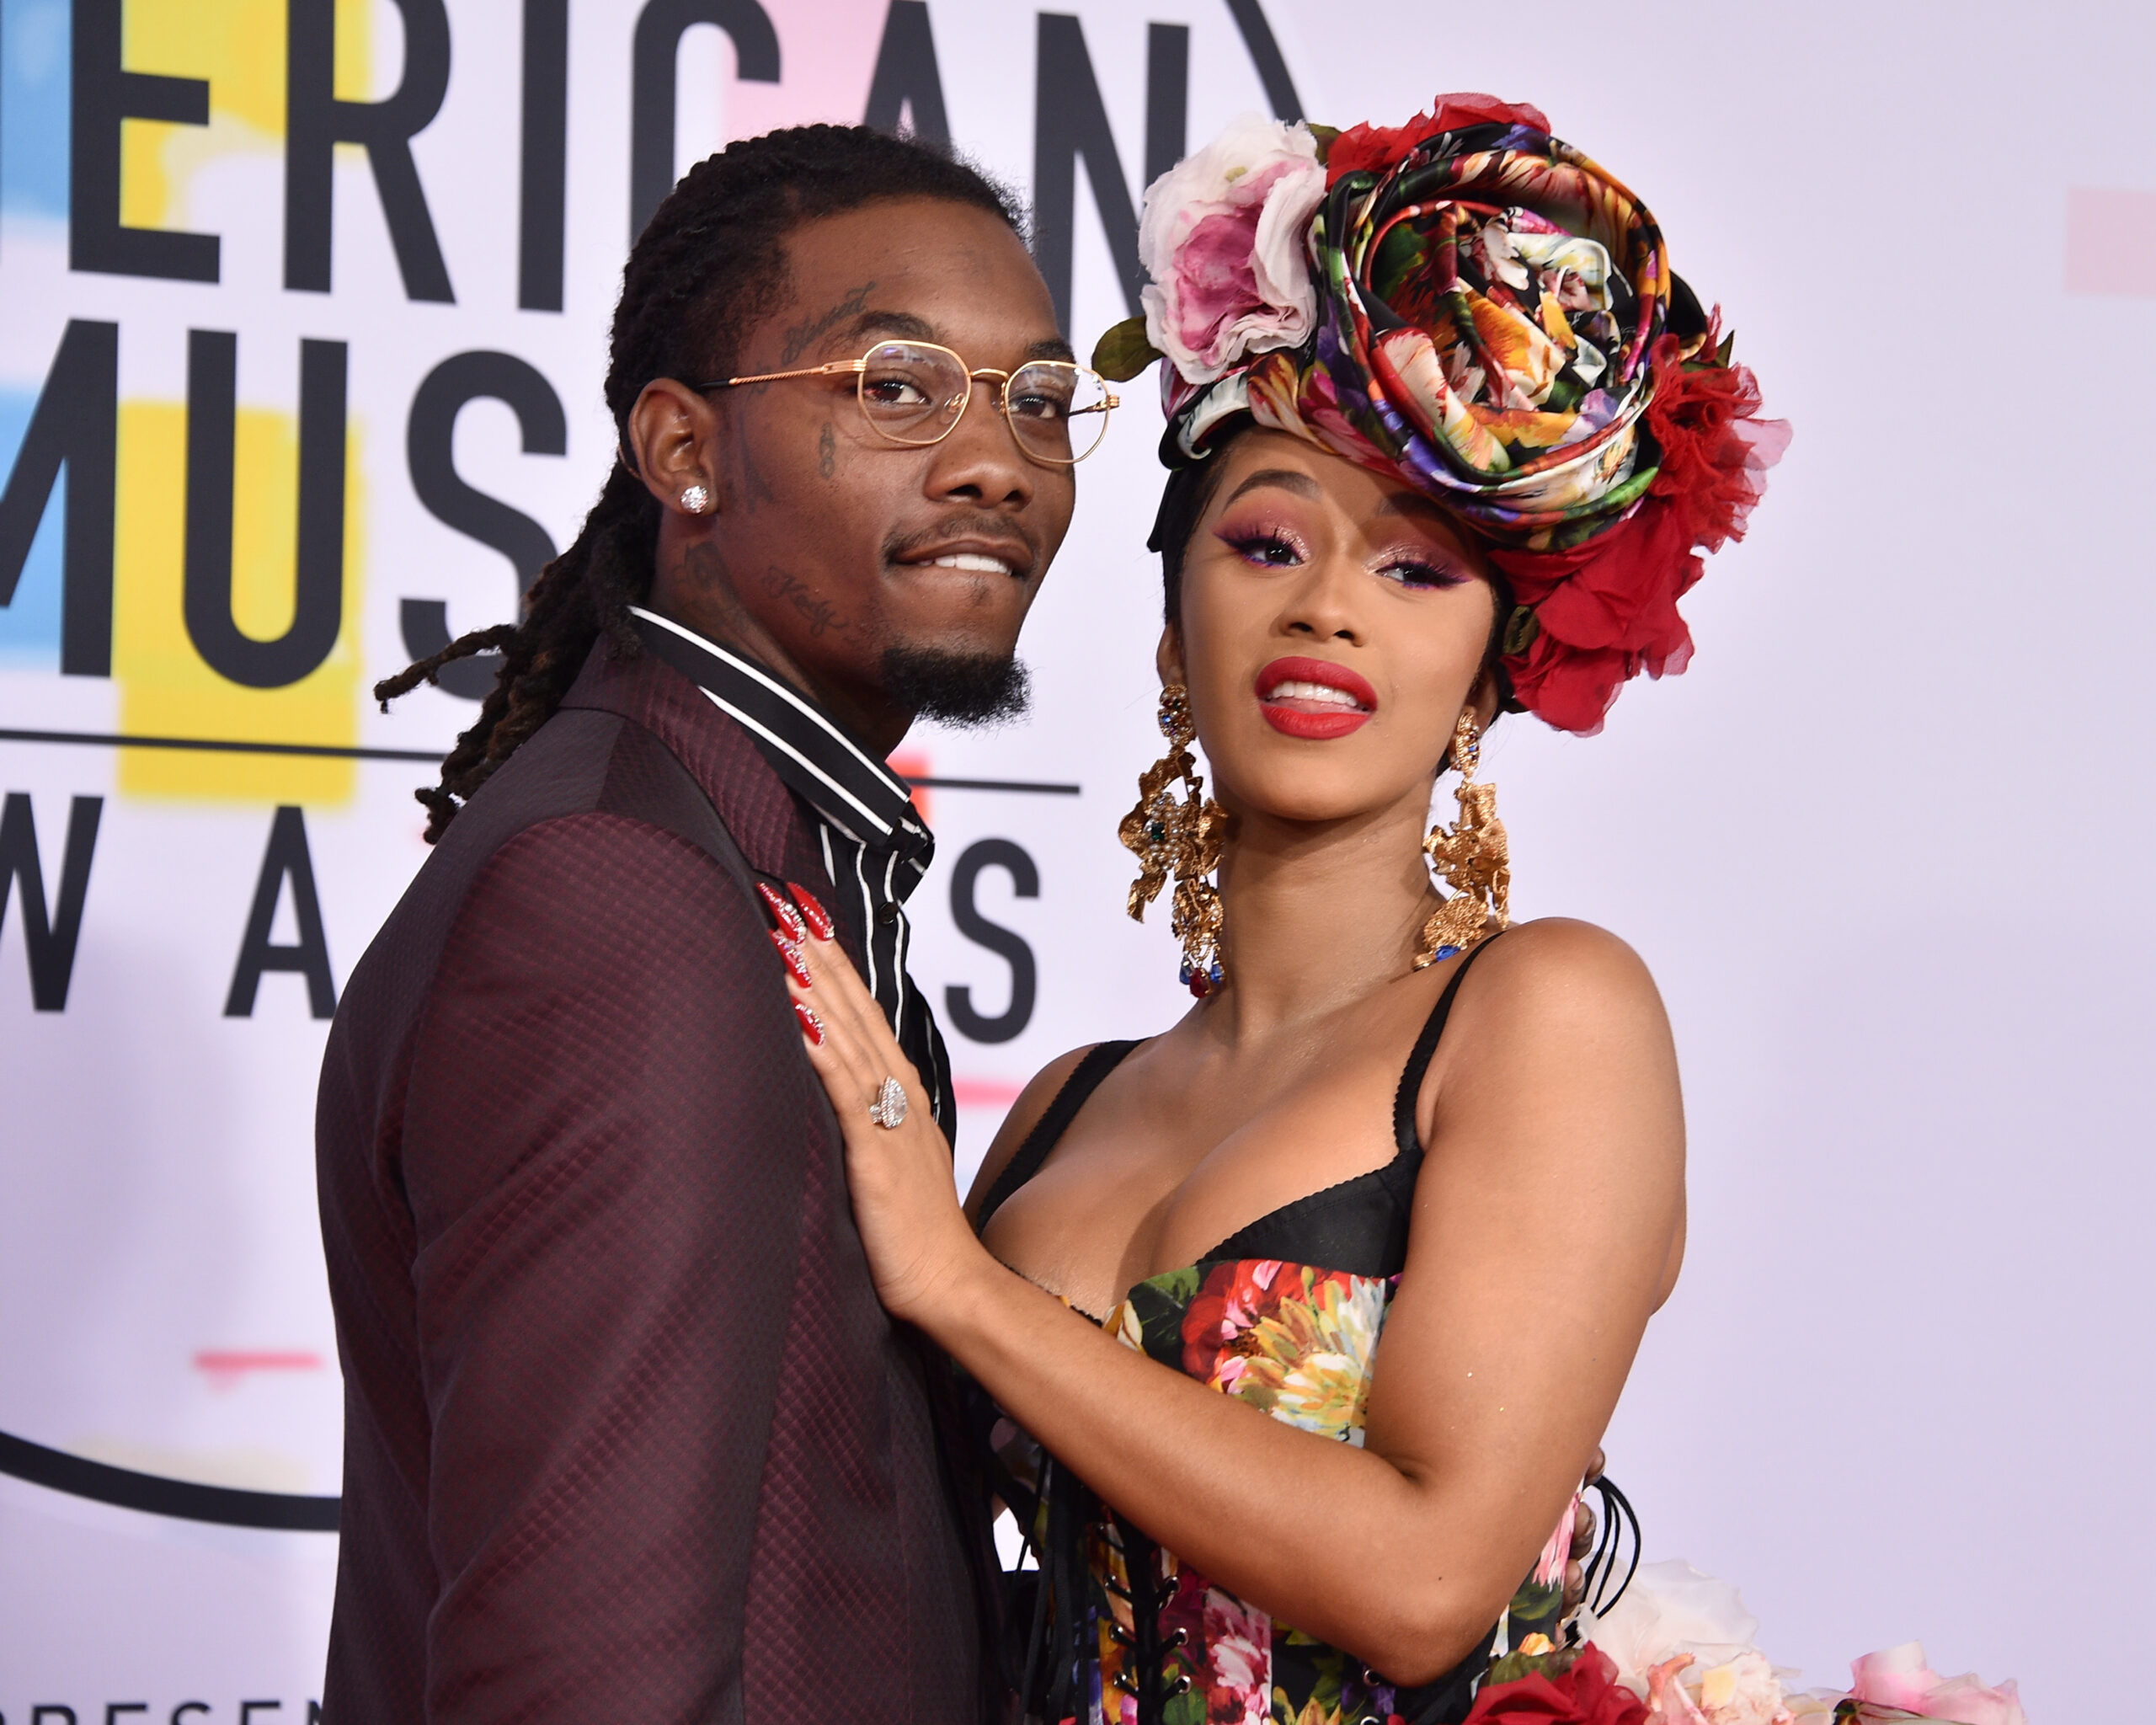 Offset Discusses Cheating On Cardi B: “I Was Young”